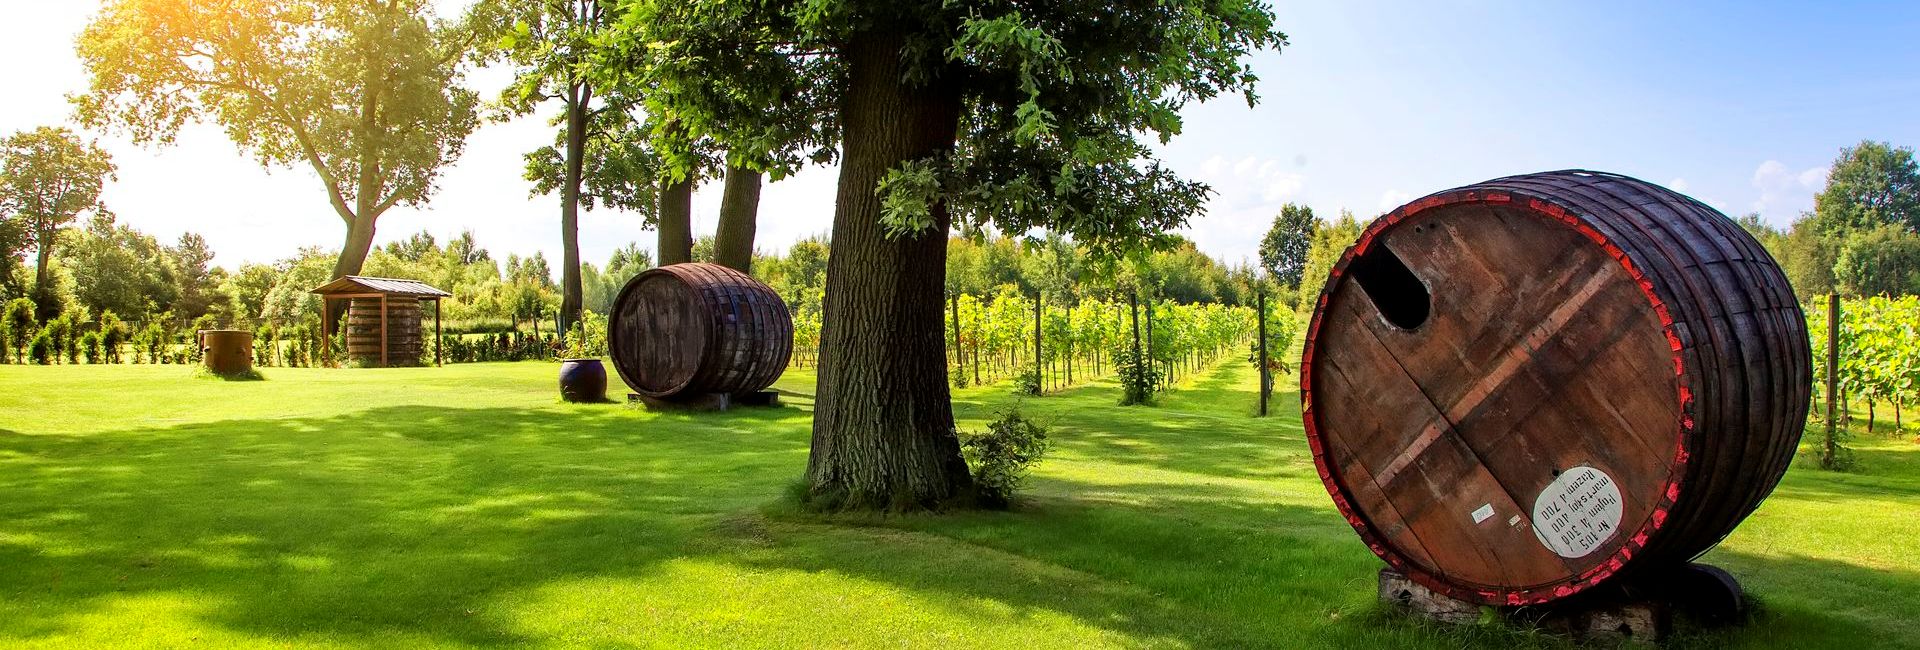 Big barrels on the lawn with vineyards in the background, Wiechlice Palace in Silesia